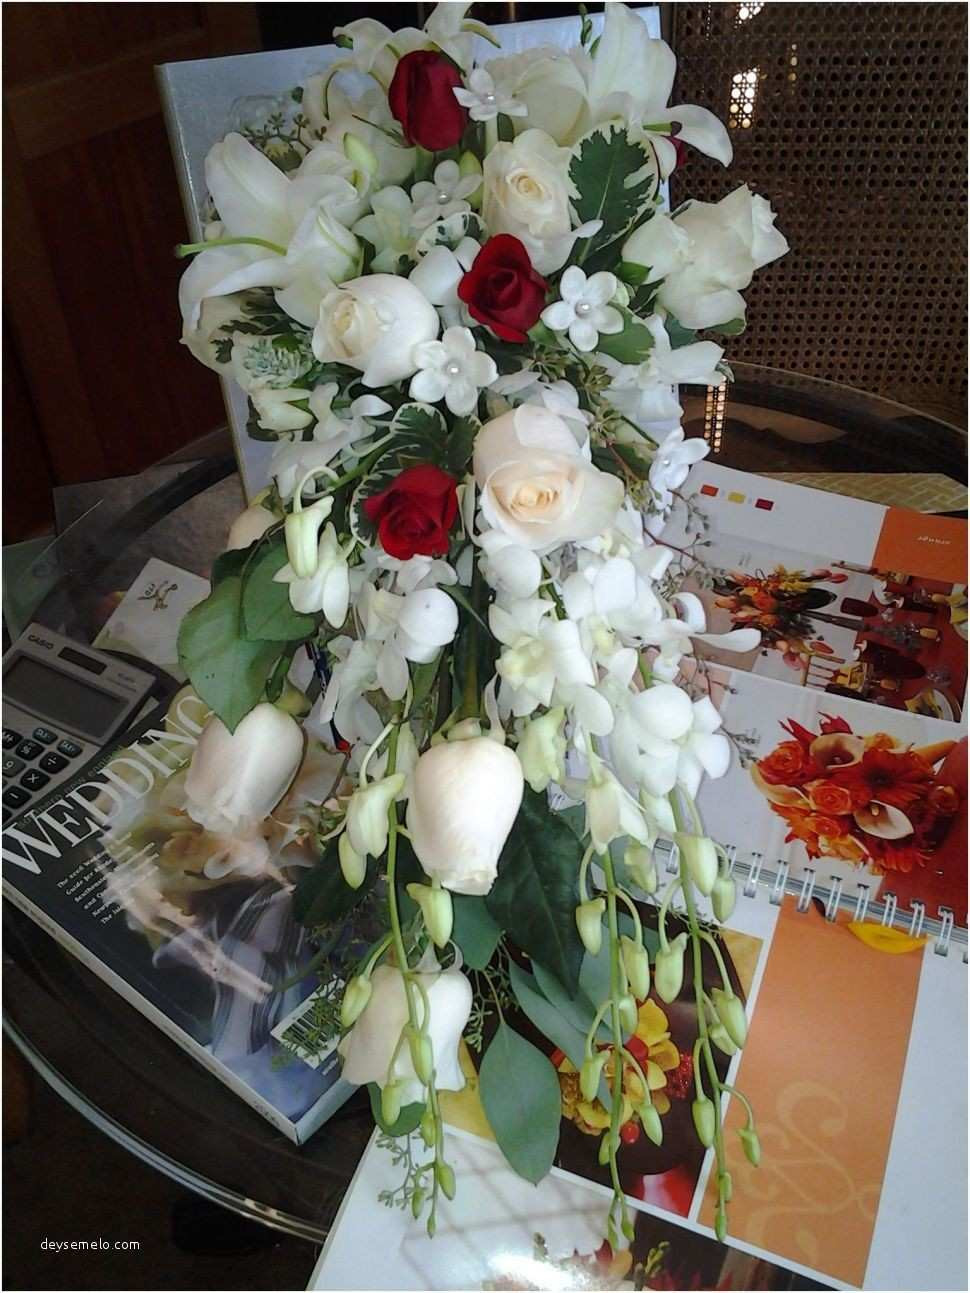 15 Stunning Rose Bouquet In Vase 2024 free download rose bouquet in vase of amazing artificial flower bouquet and fake flowers fascinating h regarding amazing artificial flower bouquet and artificial flower bouquet archaicawful a beautiful ca